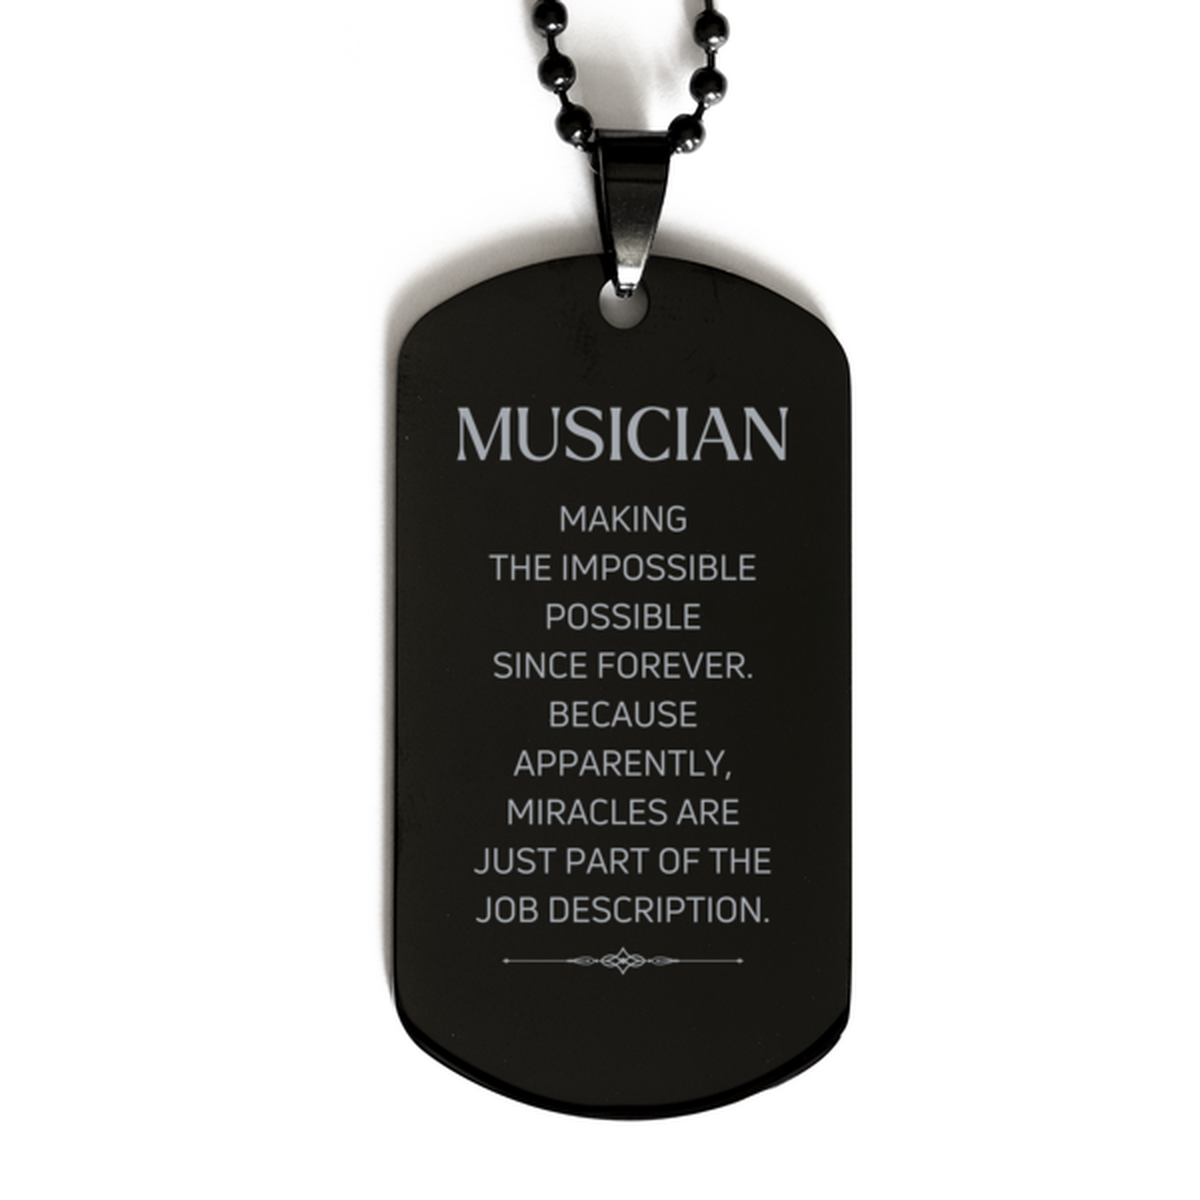 Funny Musician Gifts, Miracles are just part of the job description, Inspirational Birthday Black Dog Tag For Musician, Men, Women, Coworkers, Friends, Boss